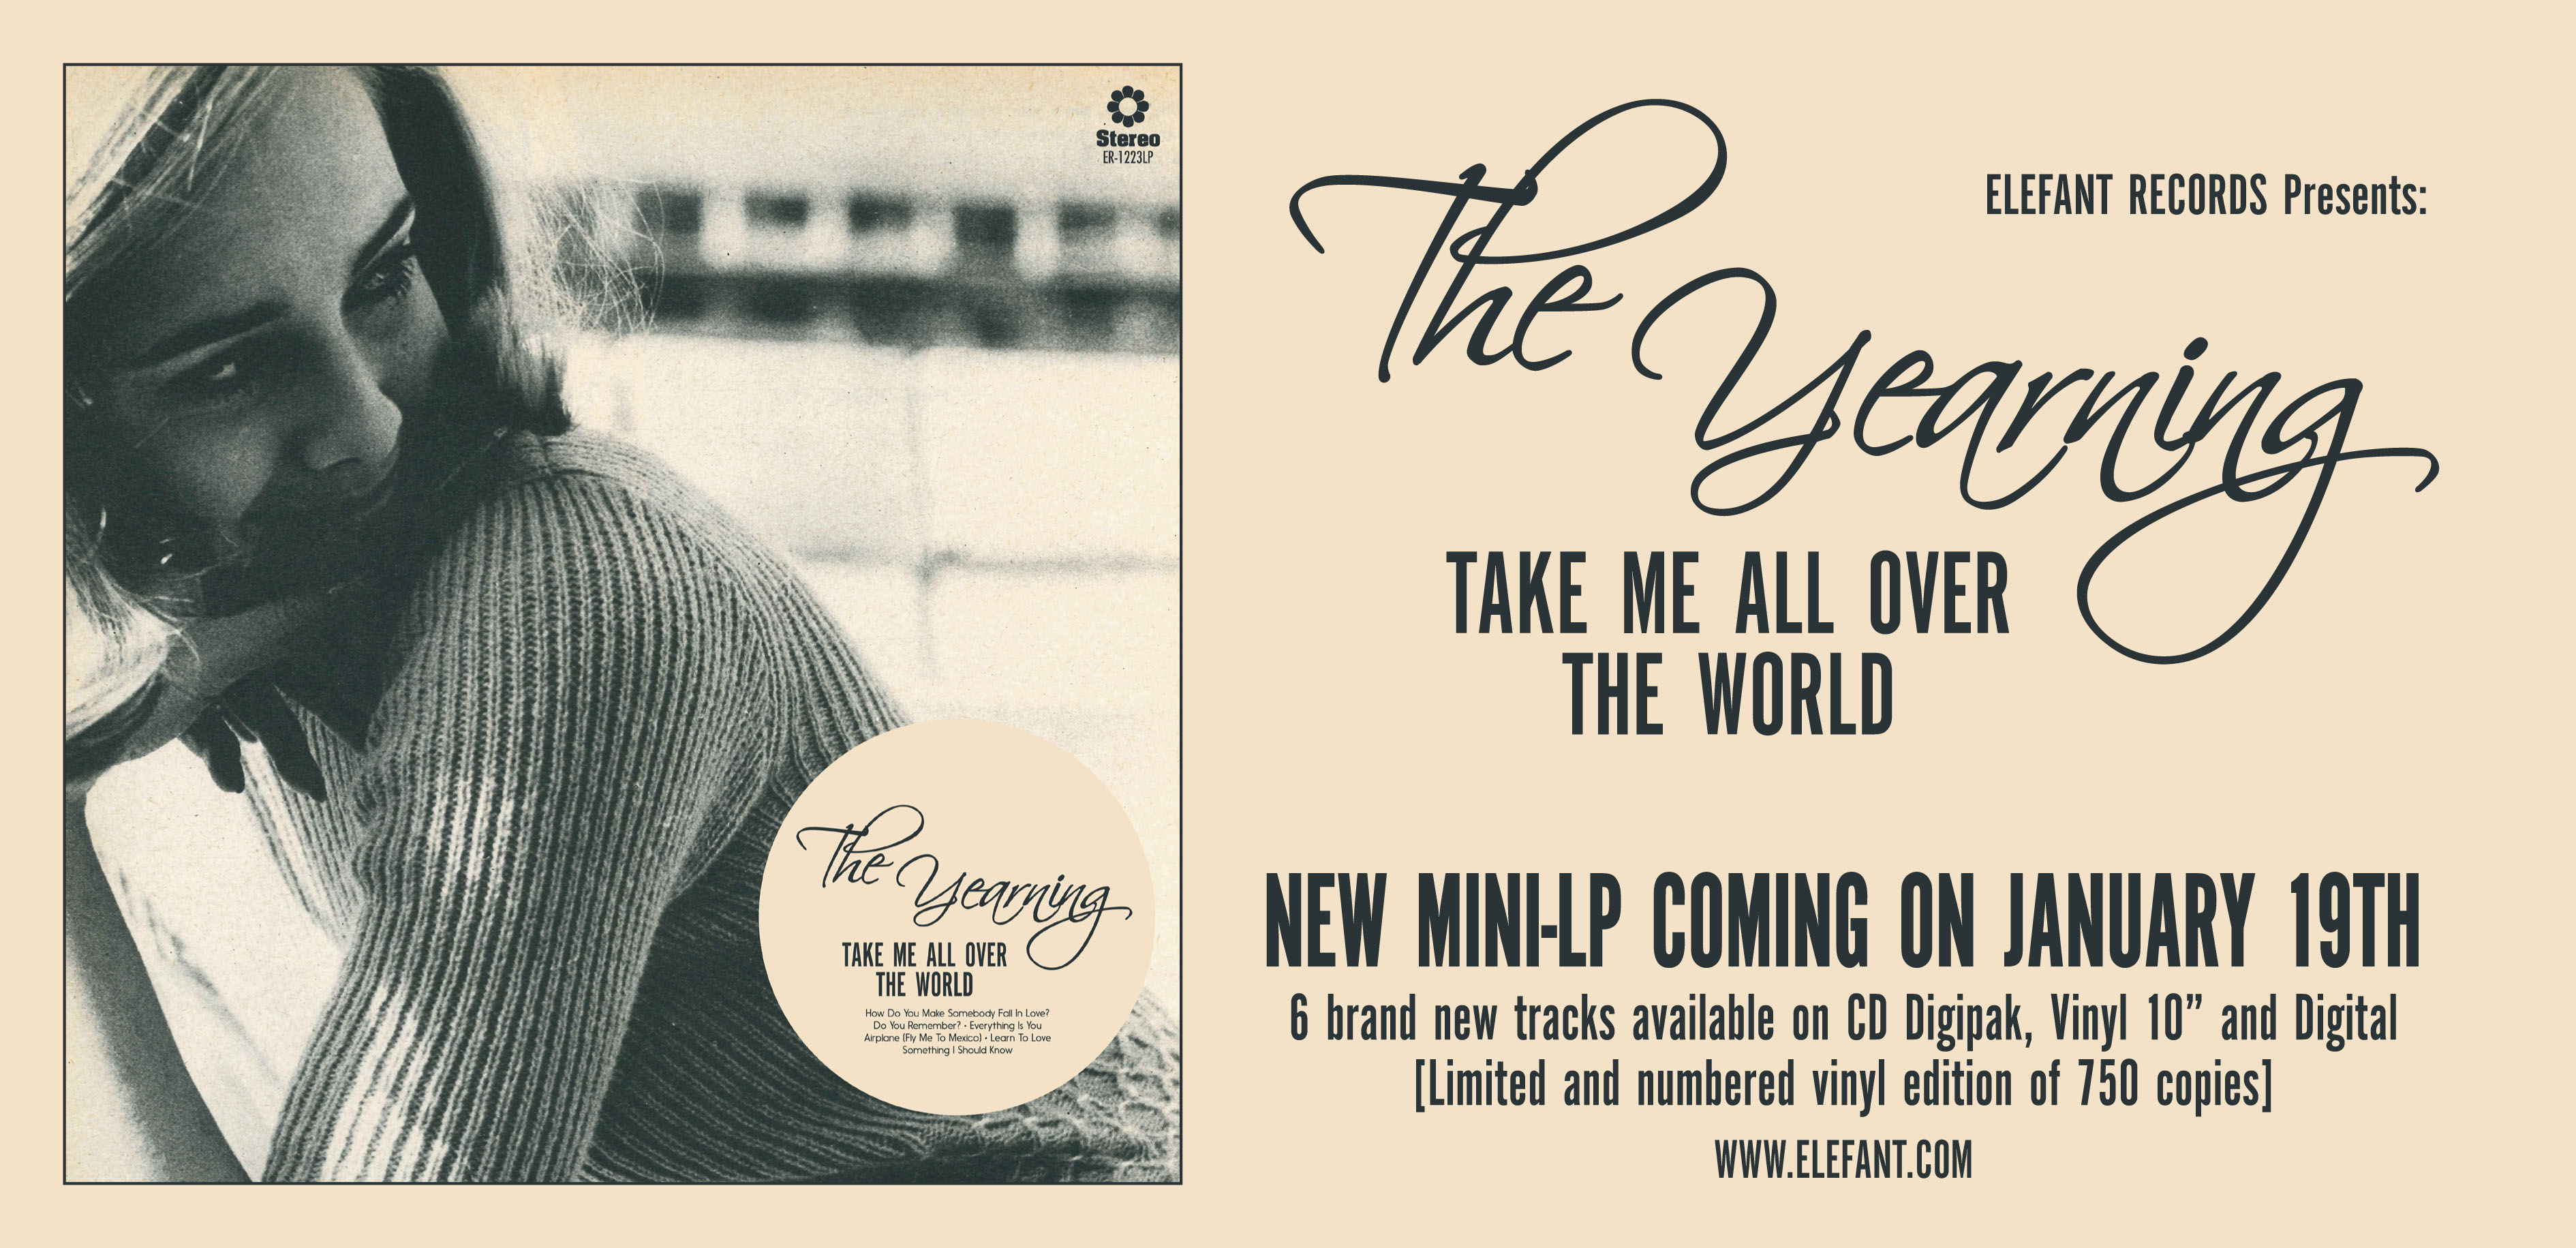 The Yearning "Take Me All Over The World"